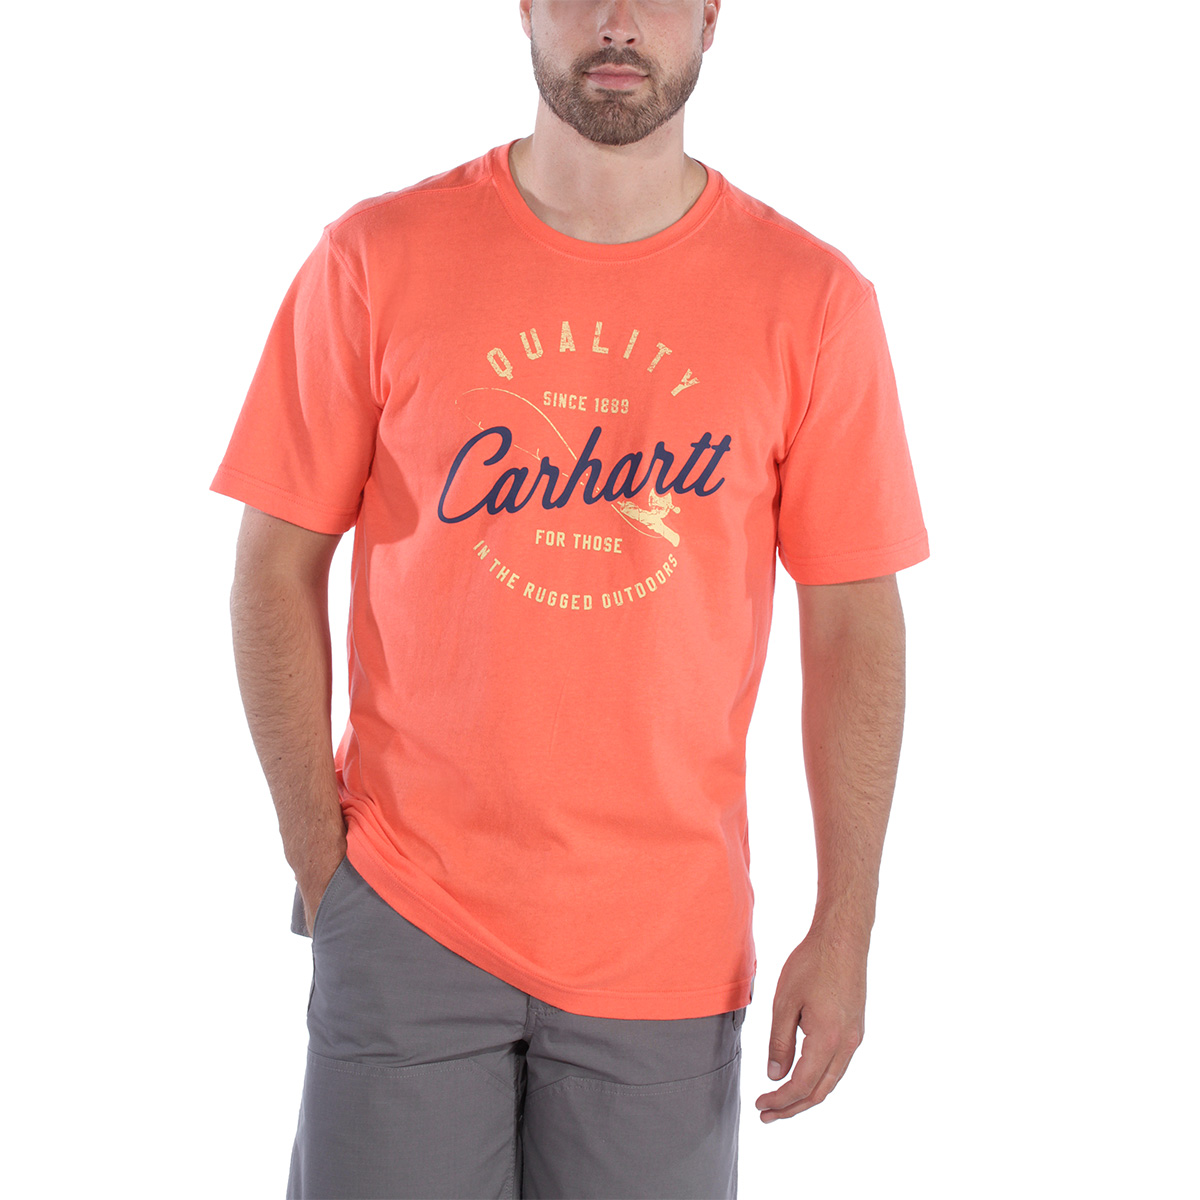 Carhartt Southern Graphic T-Shirt hot coral